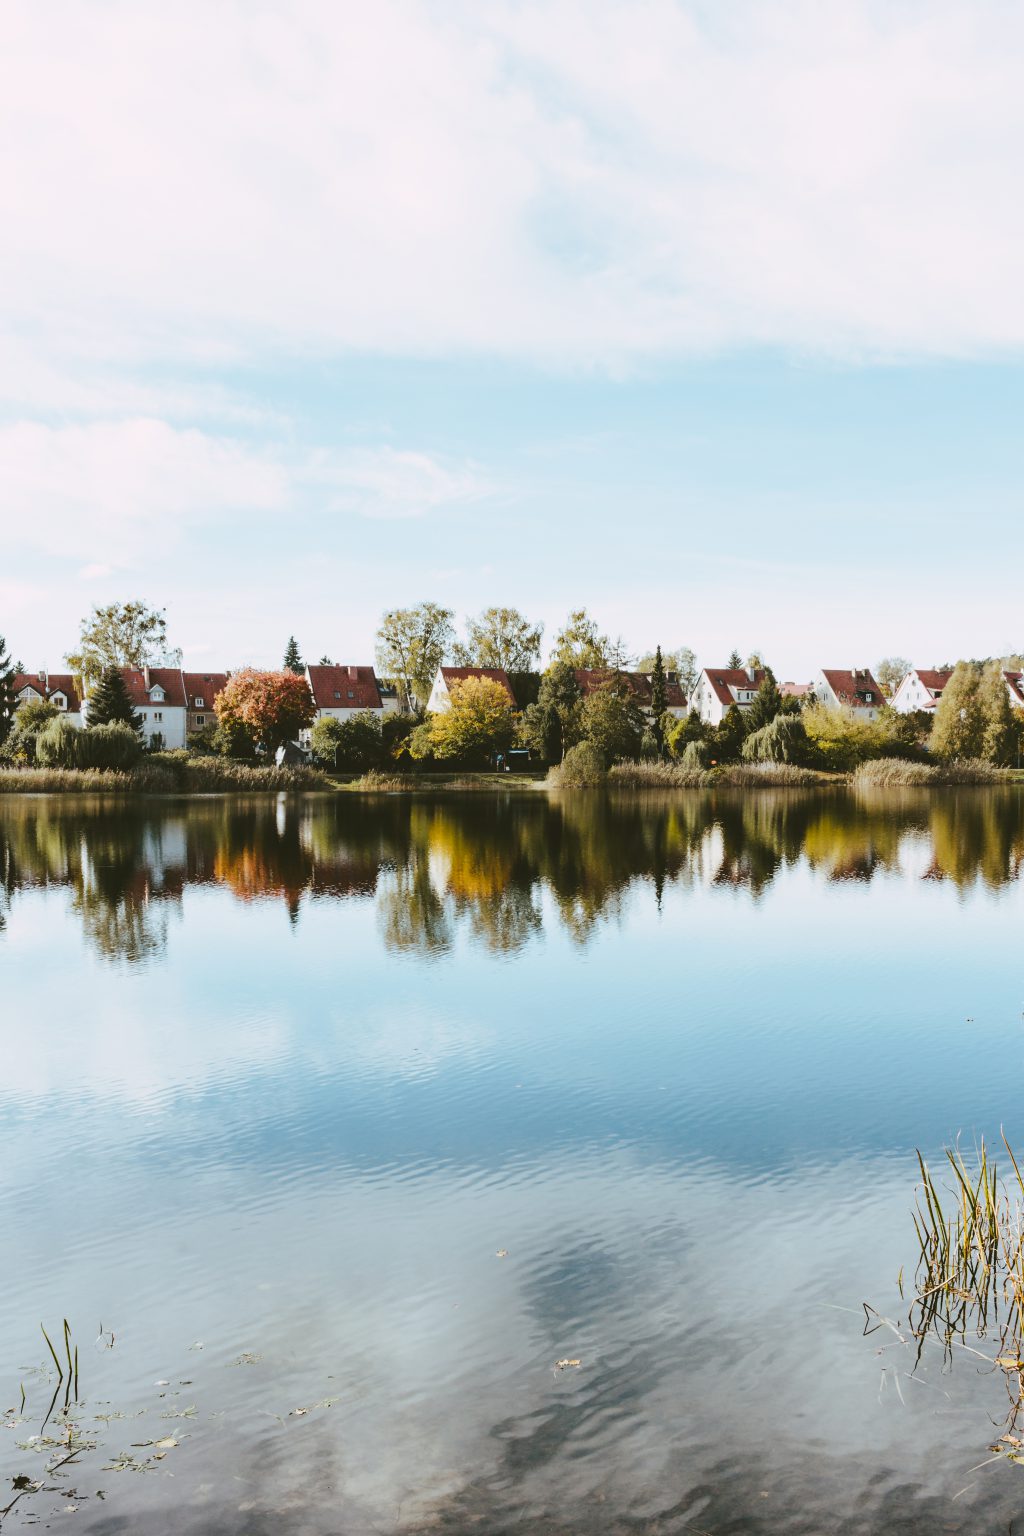 Apartment complex by the lake 2 - free stock photo